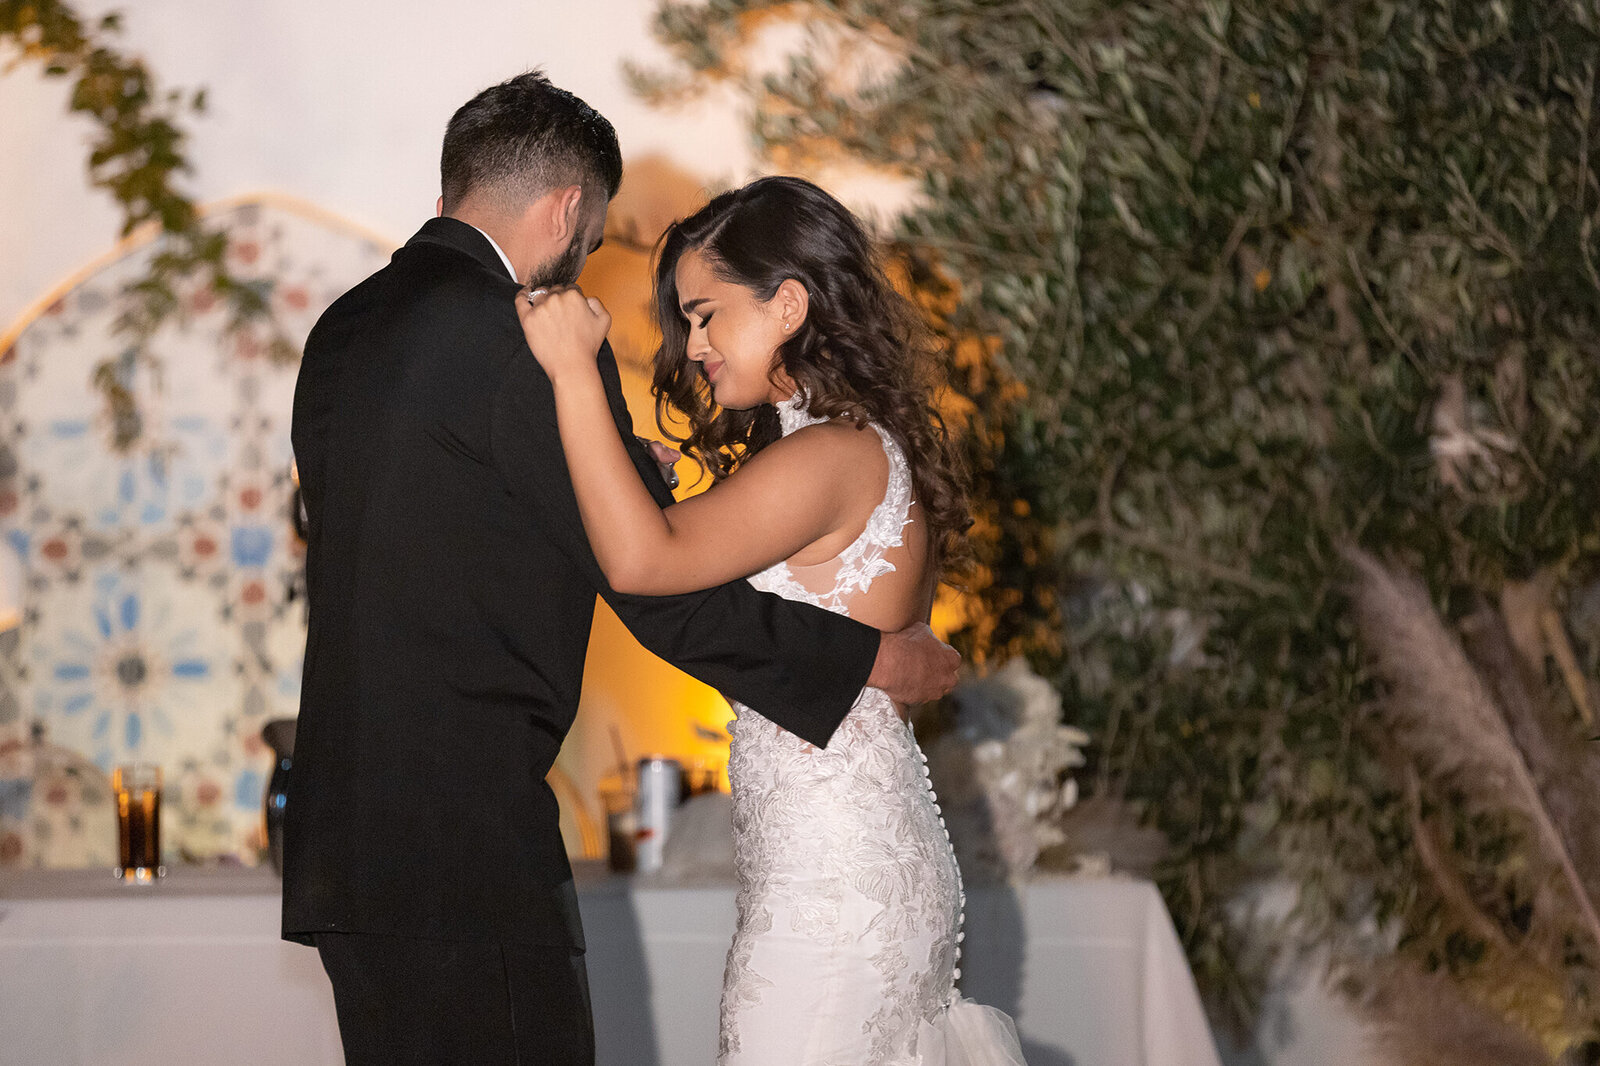 Beautiful bride crying during father daughter dance during outdoor Dallas wedding reception